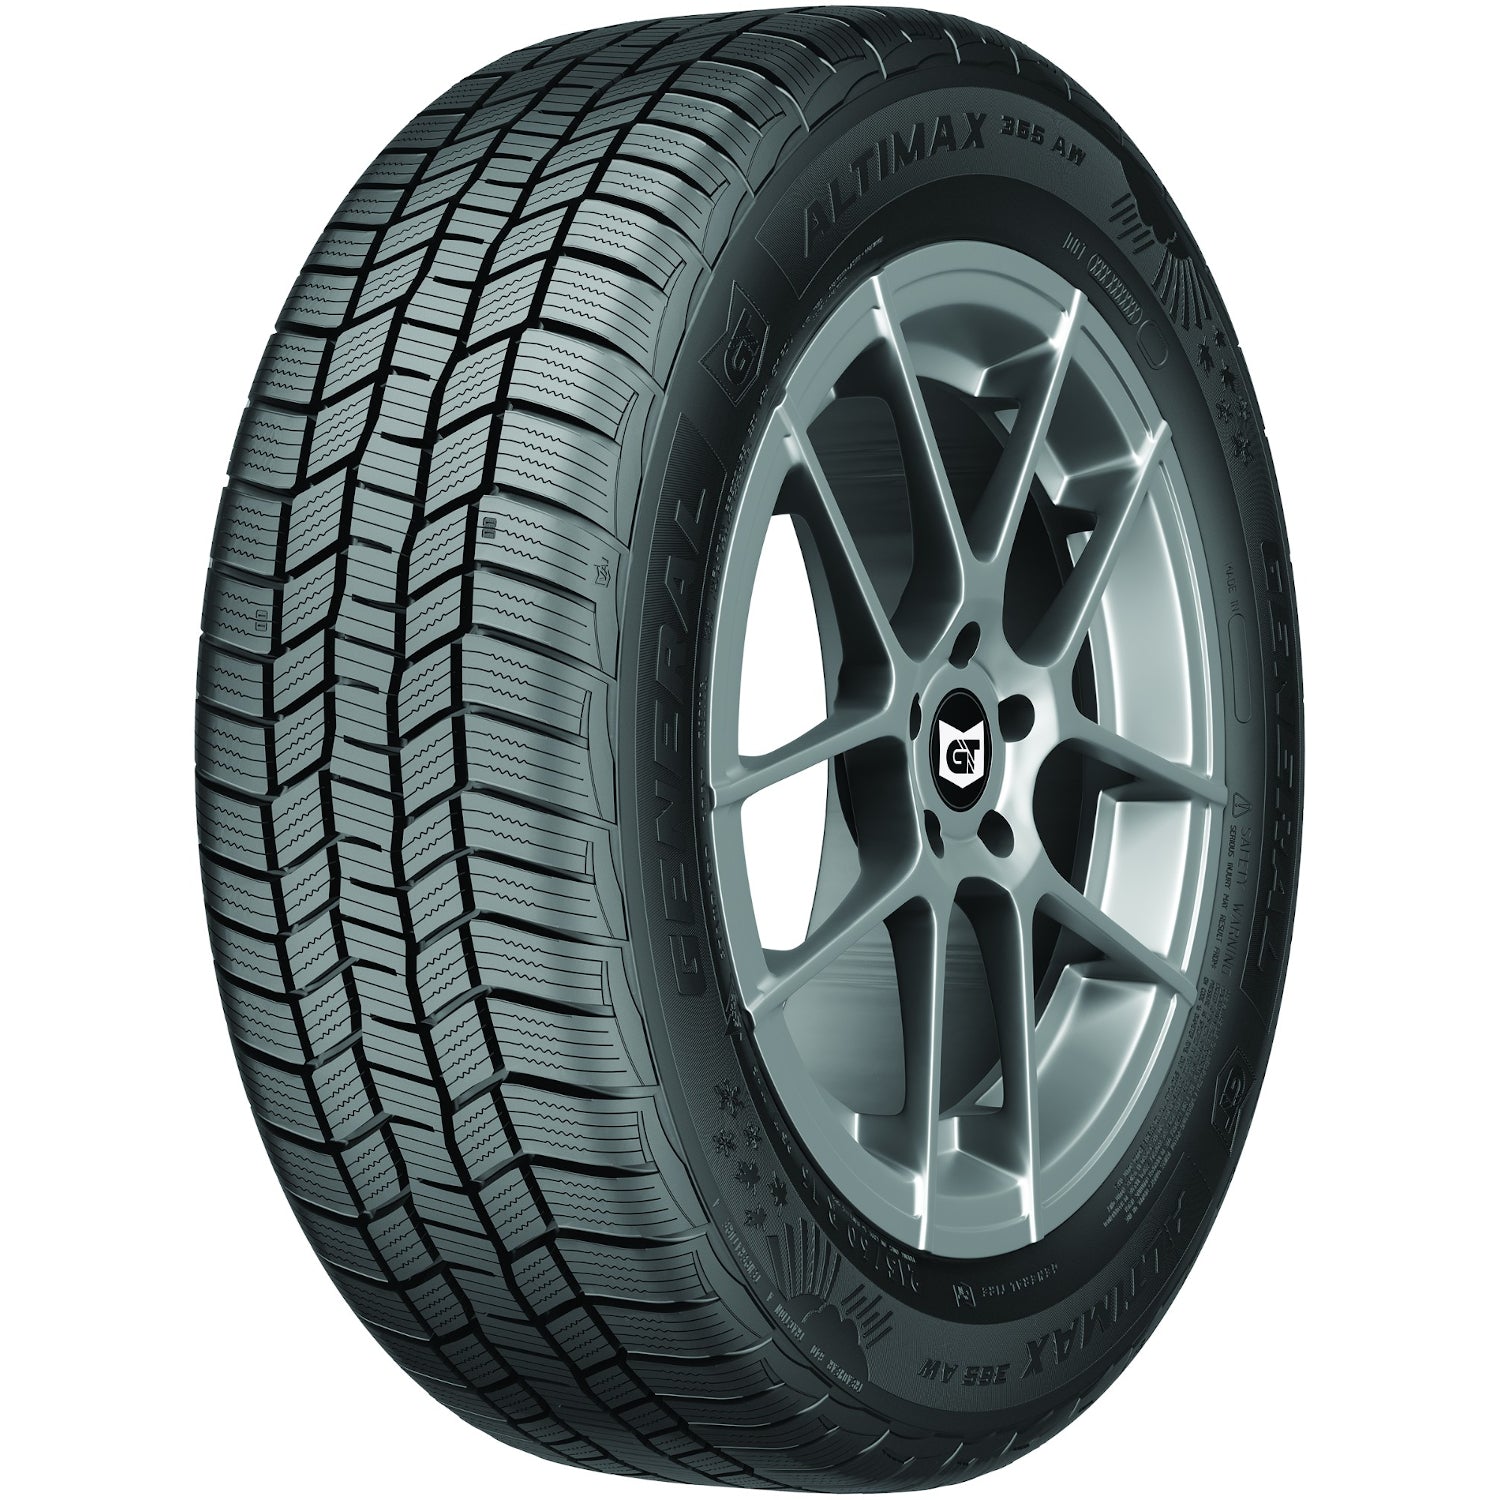 GENERAL ALTIMAX 365AW 215/65R17 (28X8.5R 17) Tires